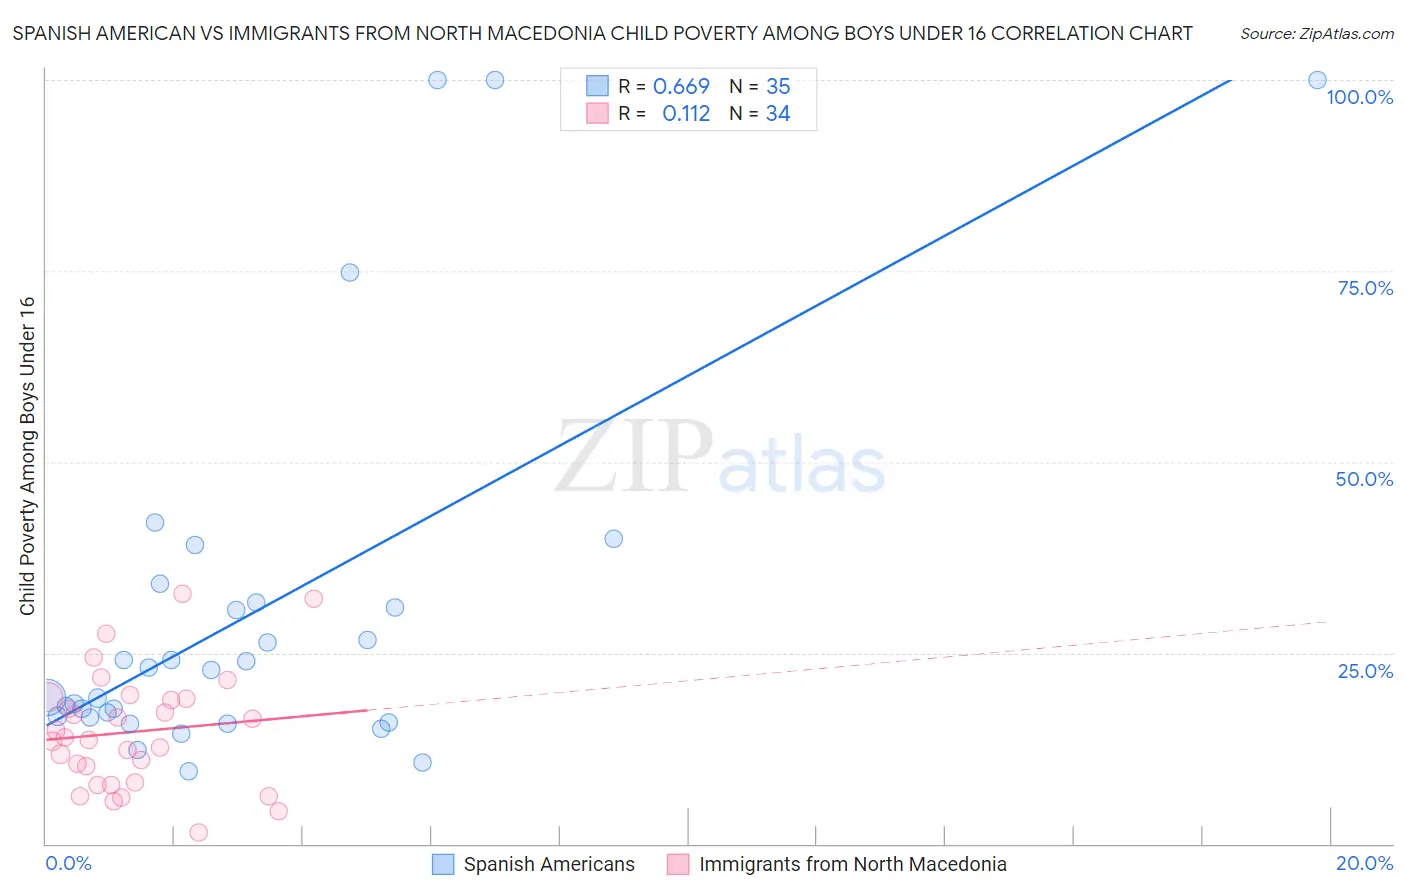 Spanish American vs Immigrants from North Macedonia Child Poverty Among Boys Under 16